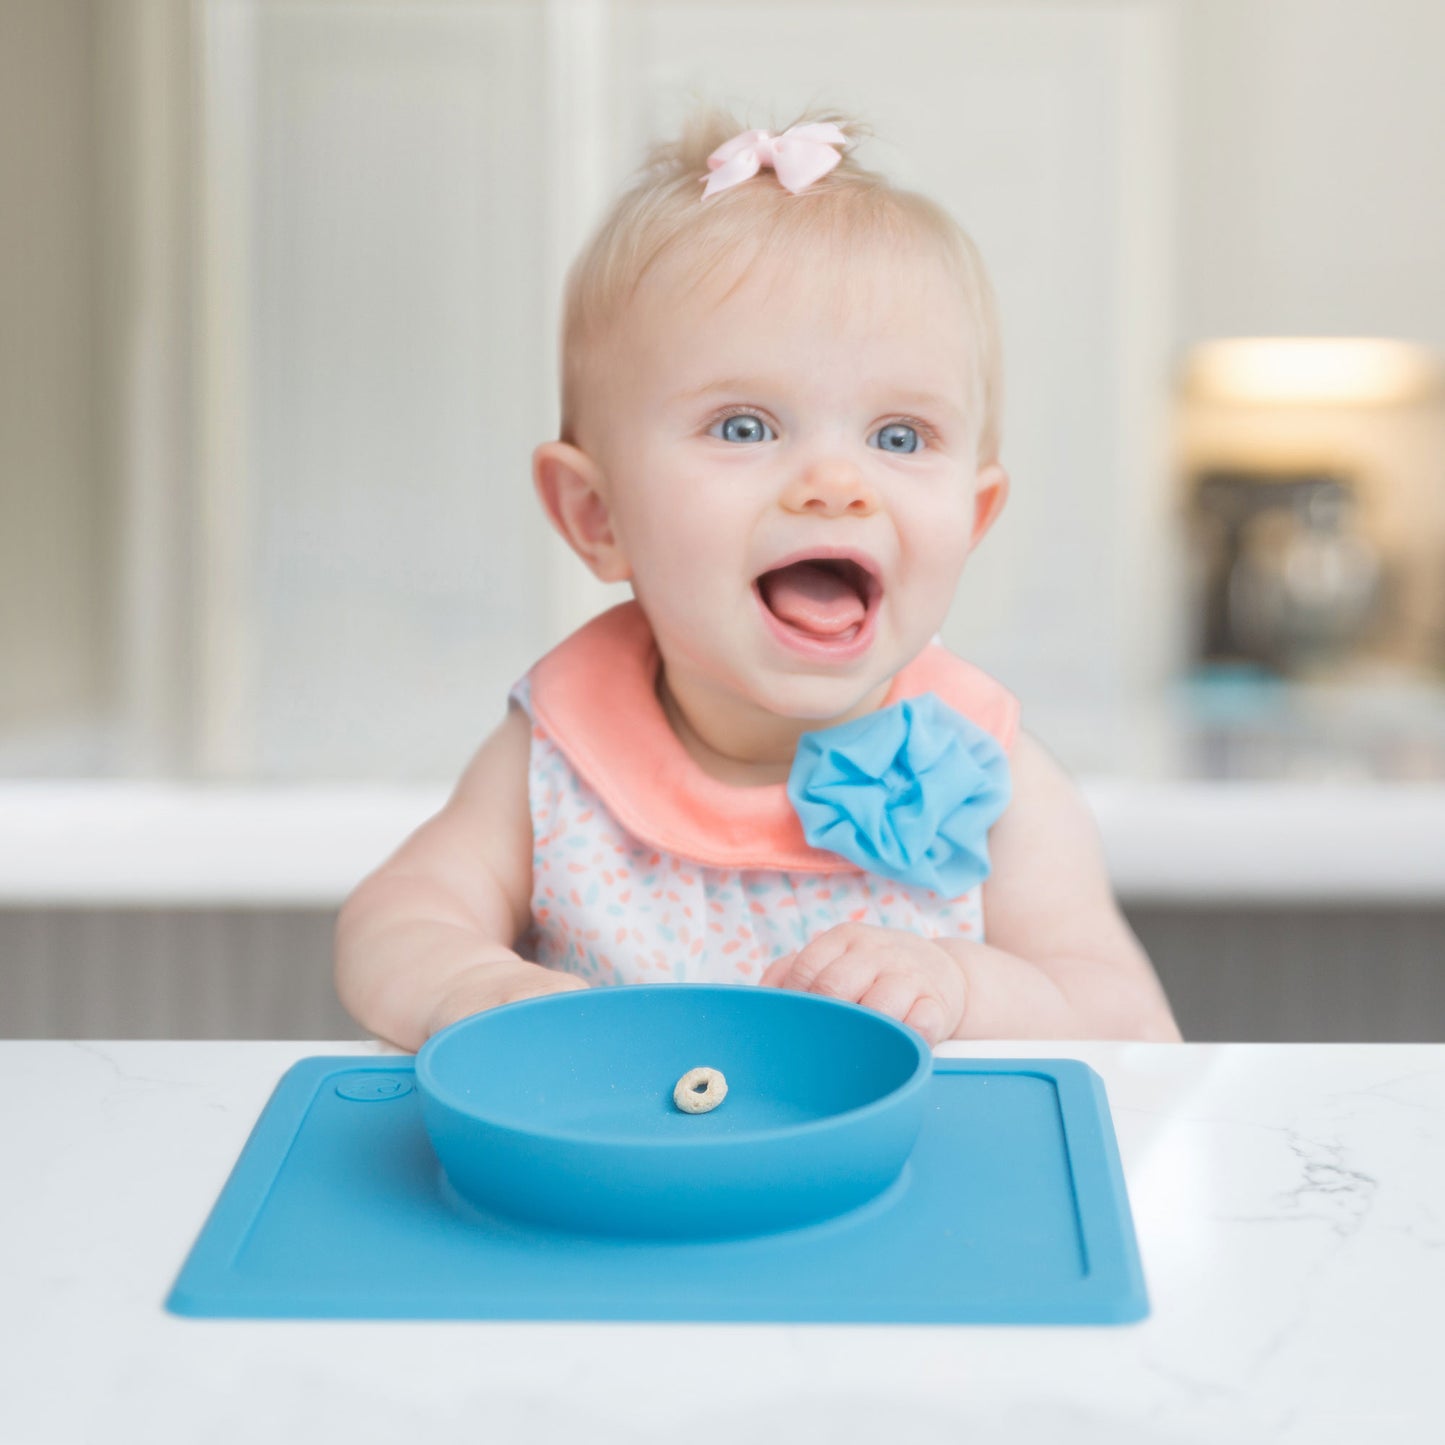 Mini Bowl in Blue by ezpz / The Original All-In-One Silicone Plates & Placemats that Stick to the Table